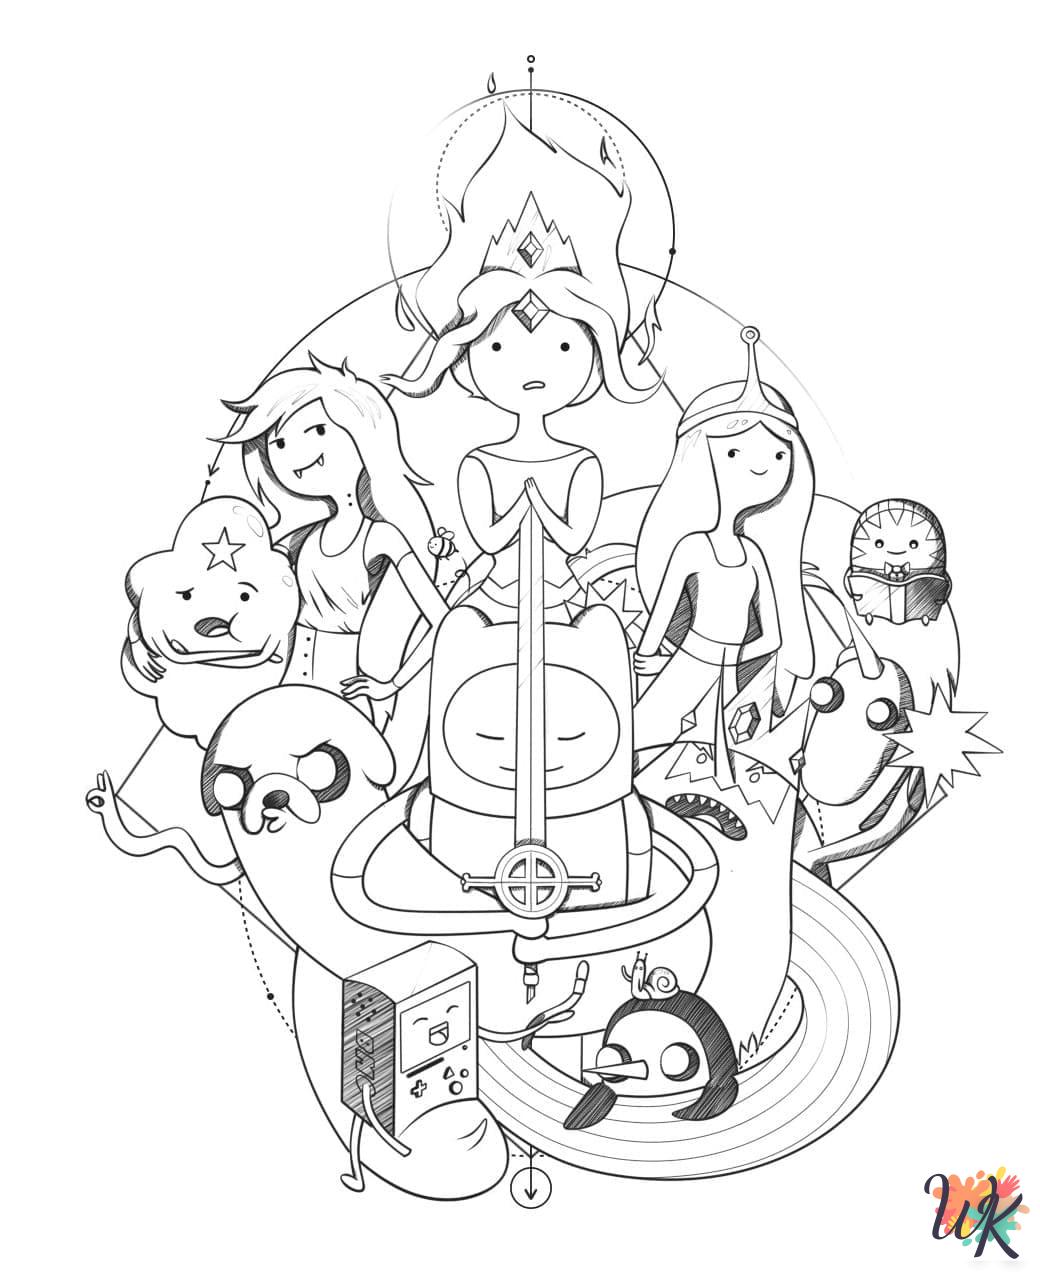 Adventure Time cards coloring pages